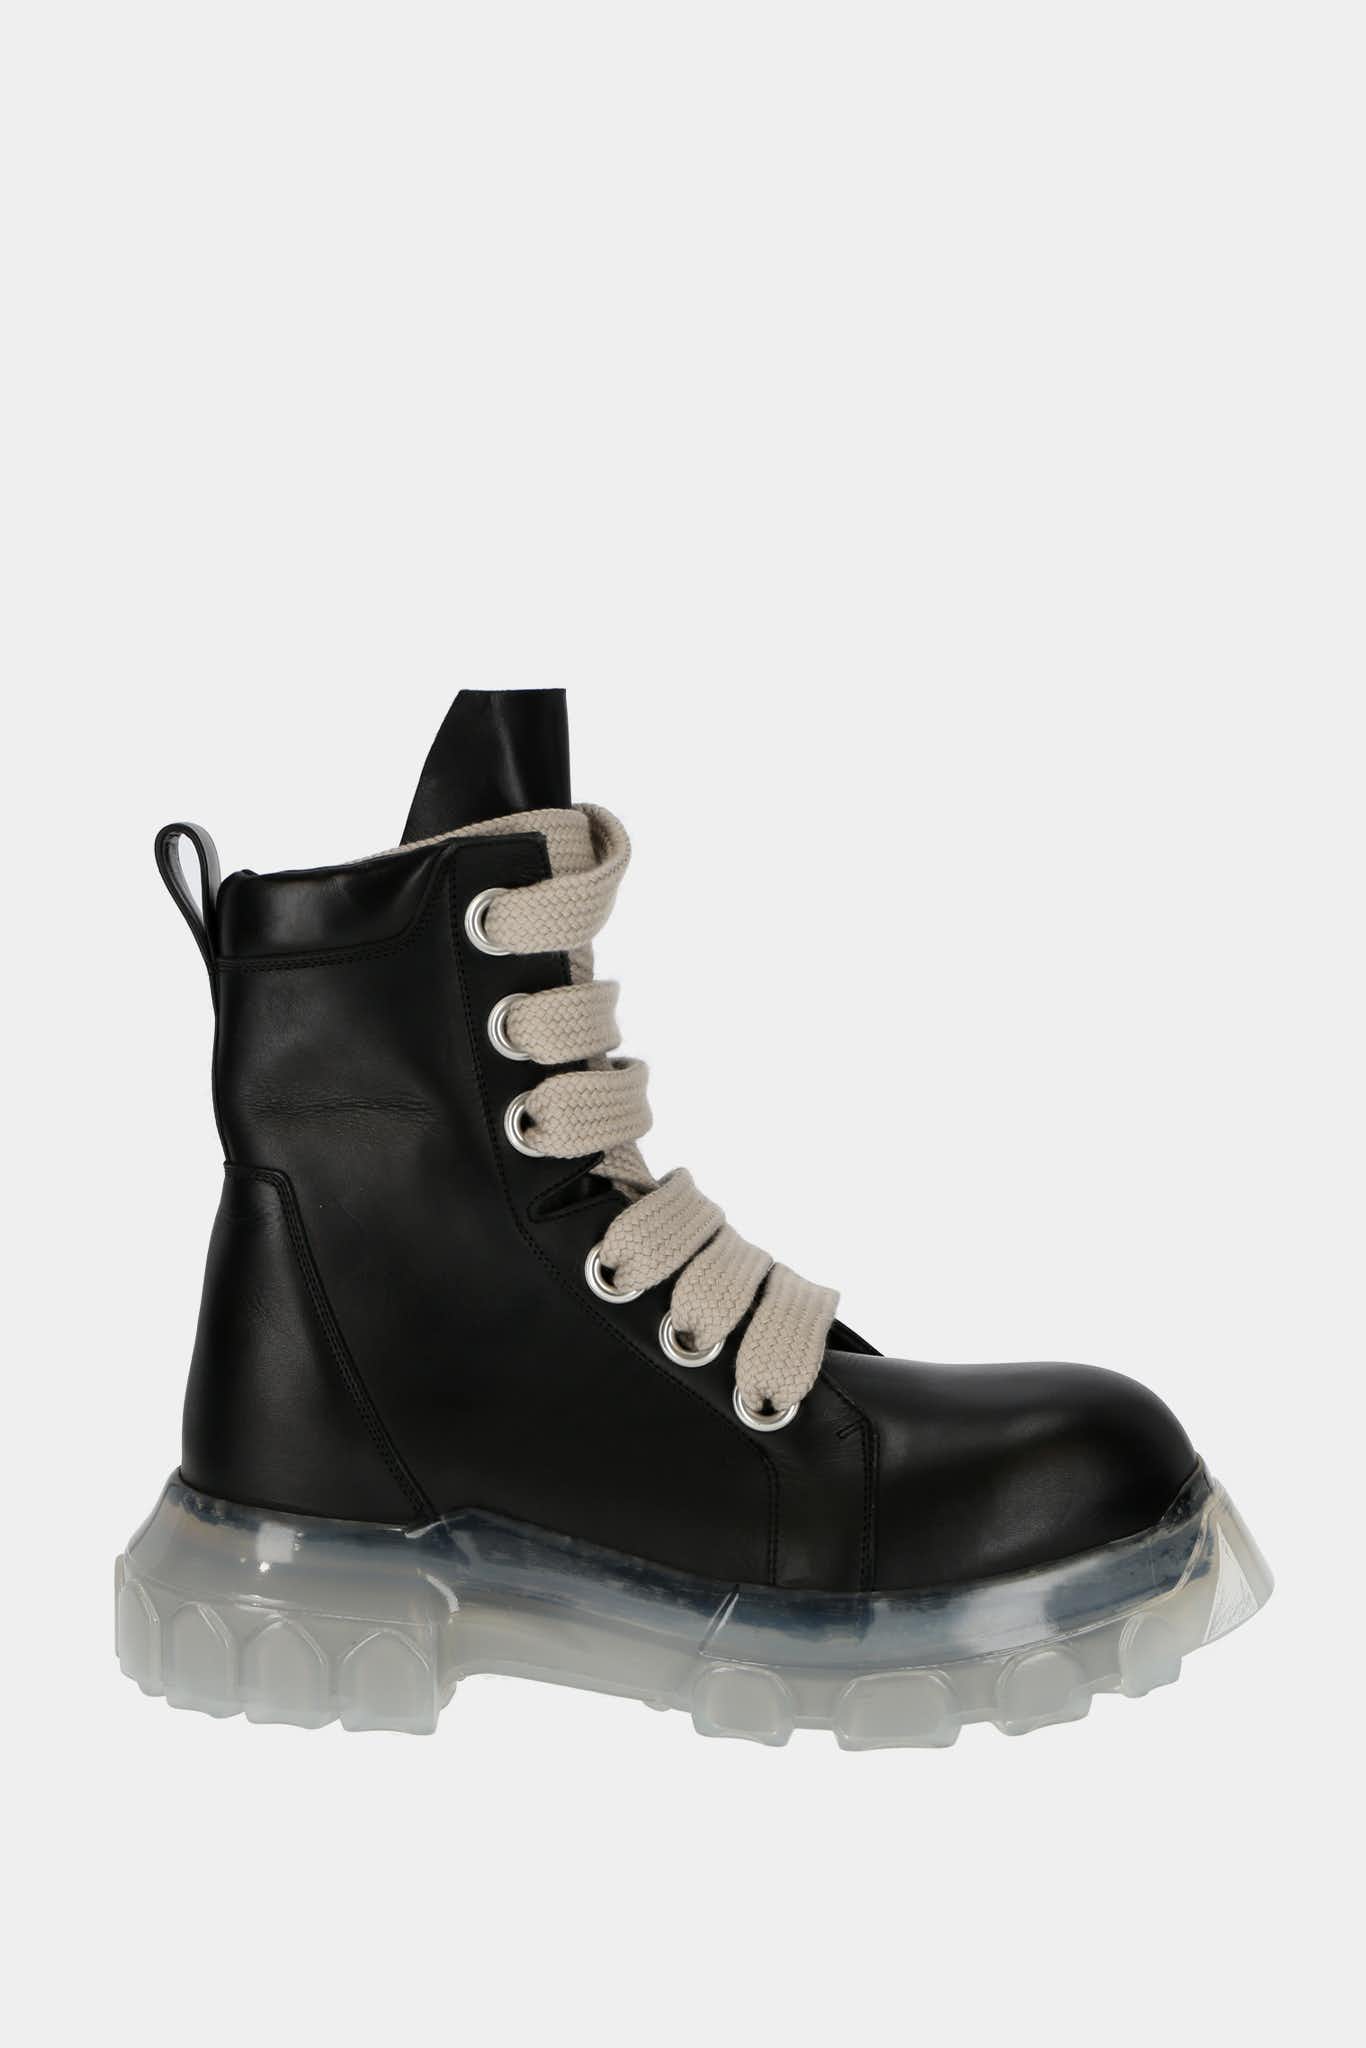 SS24リドRick Owens Beatle Bozo Tractor Boots 41